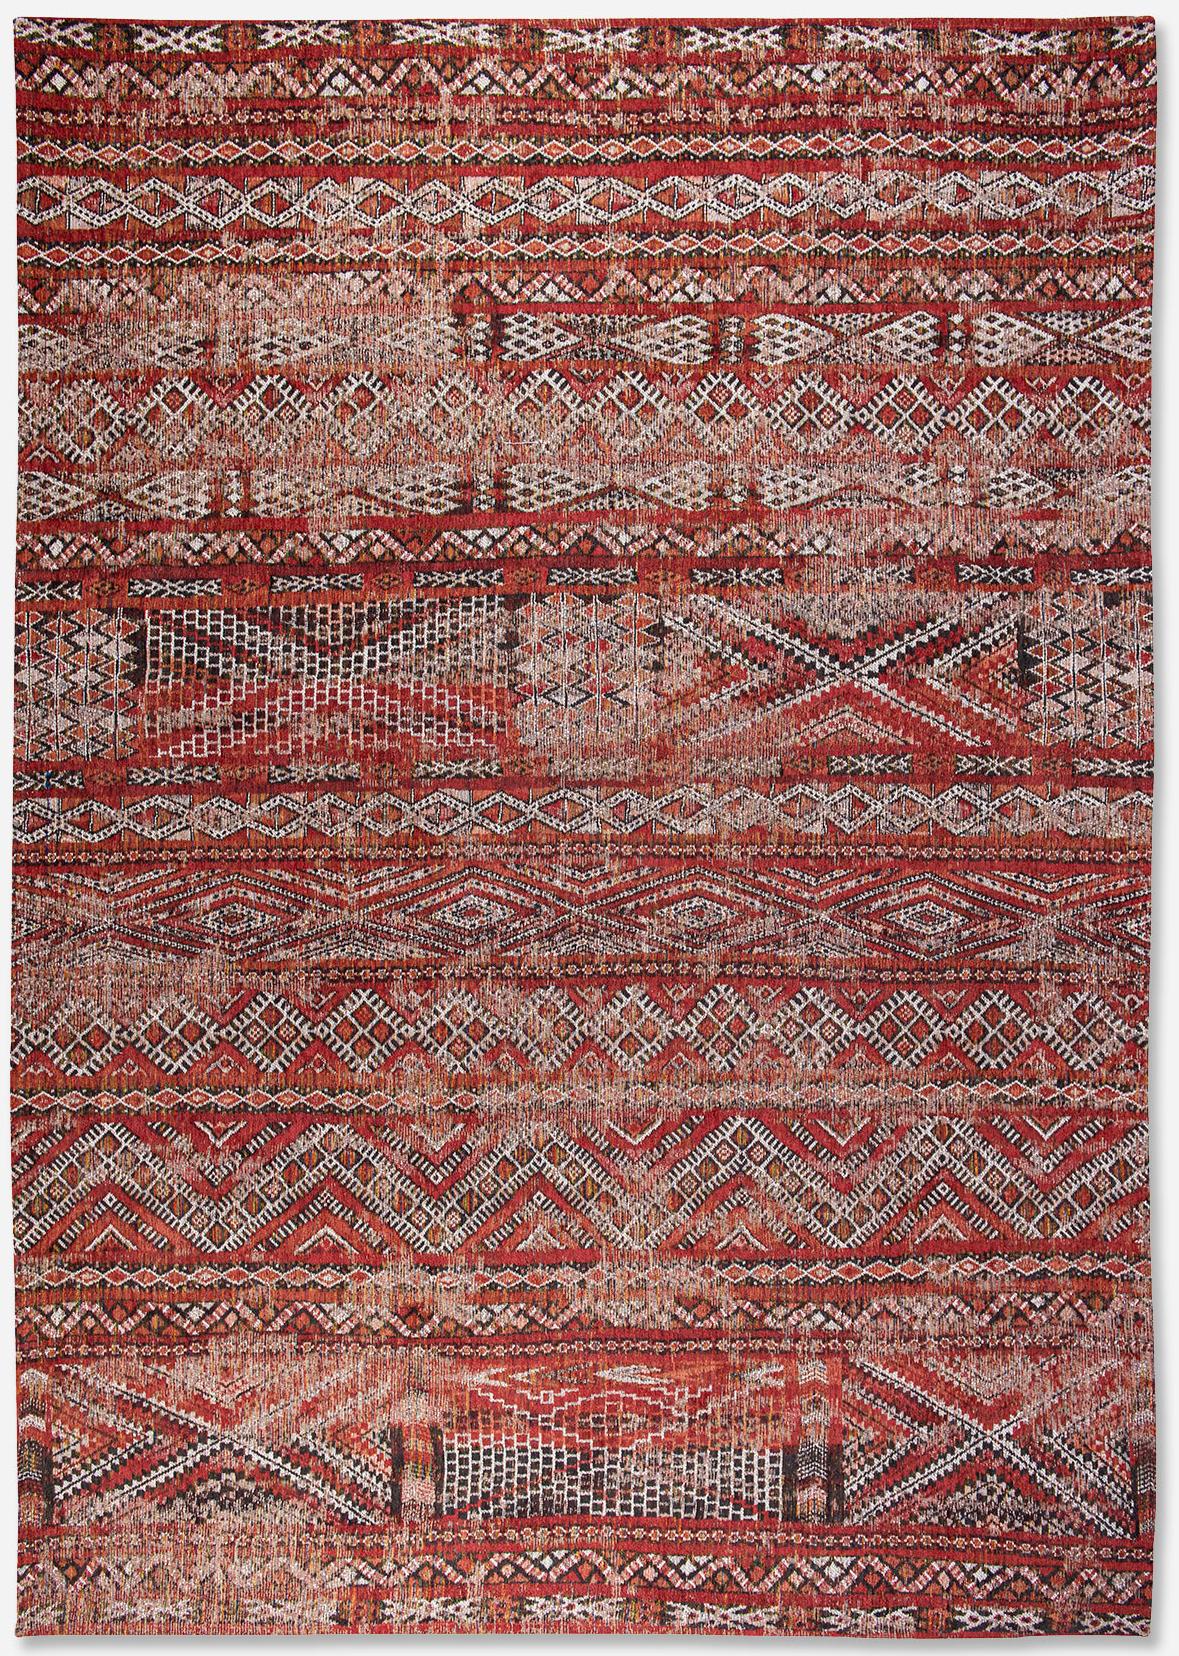 Antiquarian Flatwoven Red Rug ☞ Size: 4' 7" x 6' 7" (140 x 200 cm)